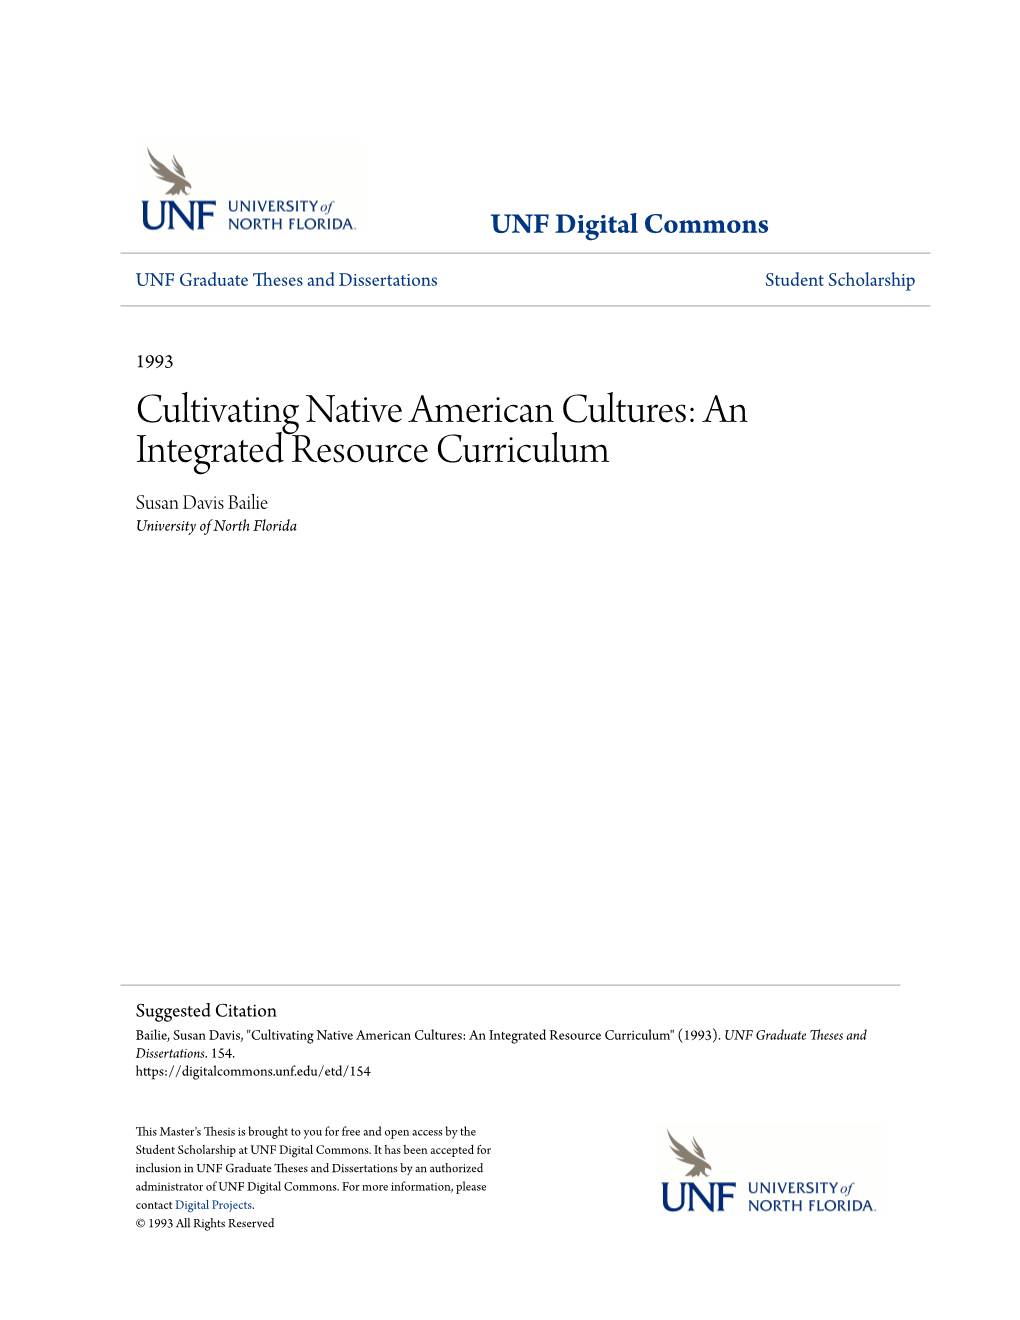 Cultivating Native American Cultures: an Integrated Resource Curriculum Susan Davis Bailie University of North Florida